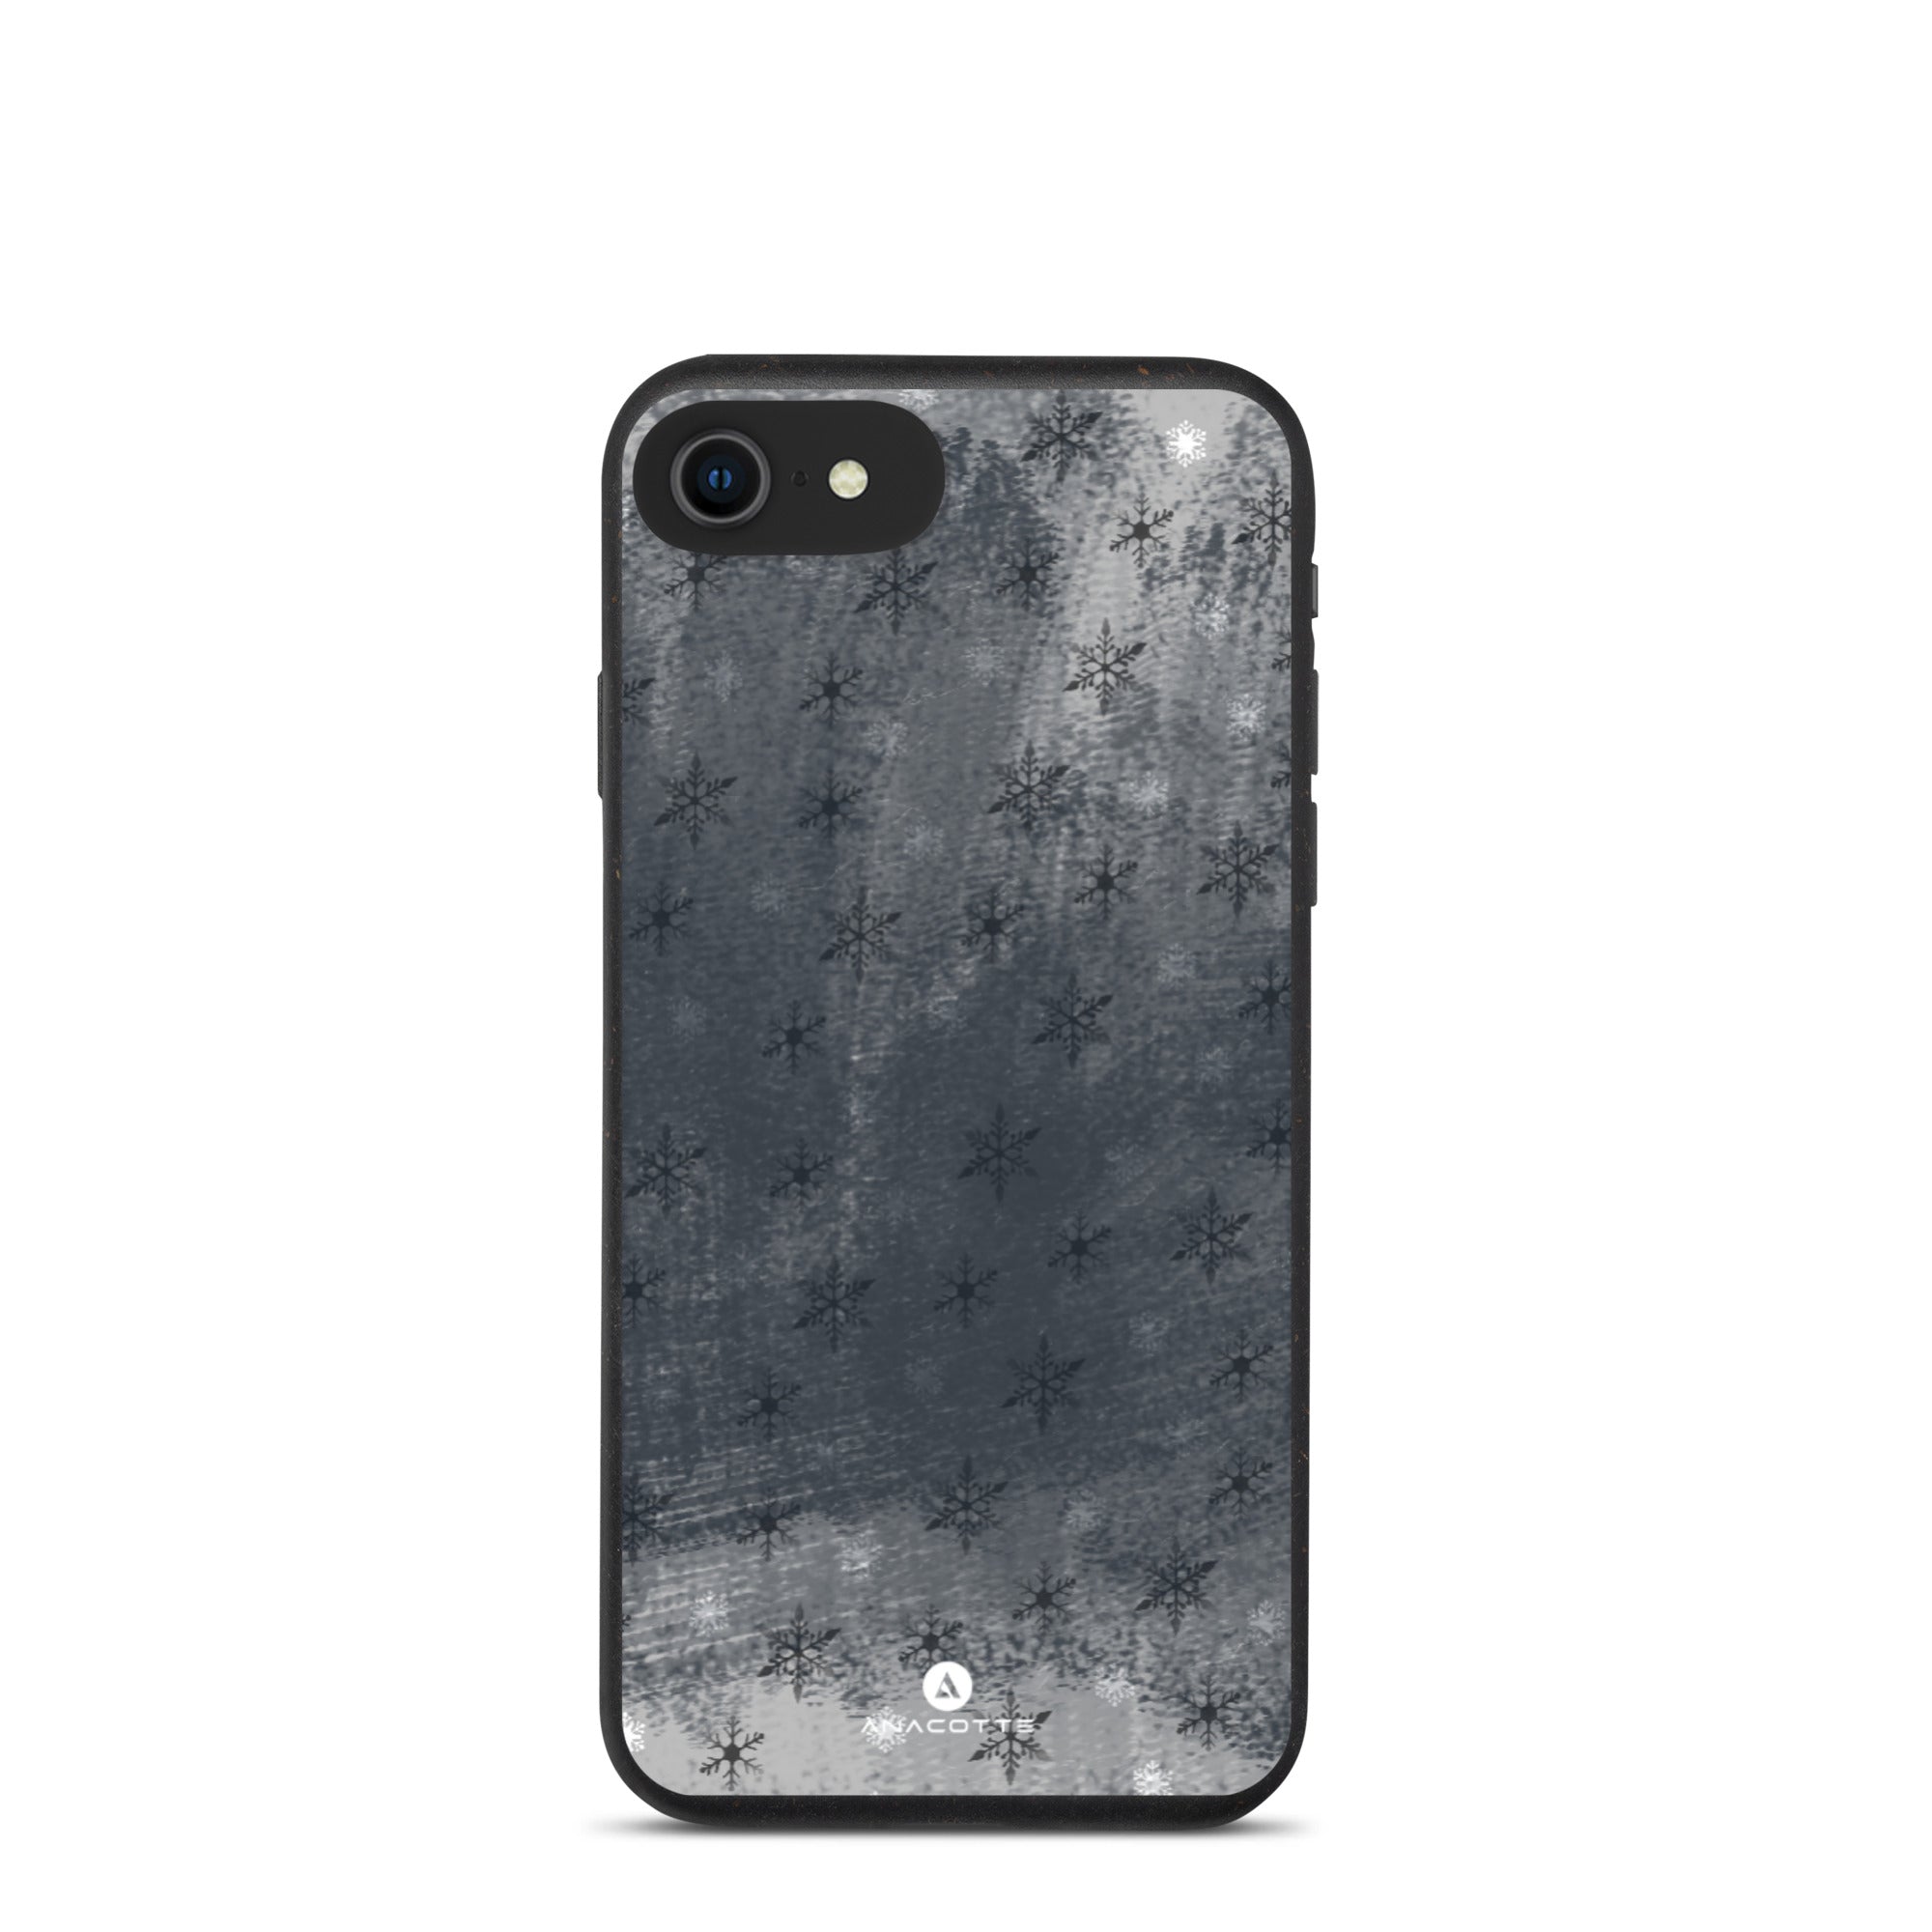 Christmas Edition Eco-Friendly Sustainable iPhone case